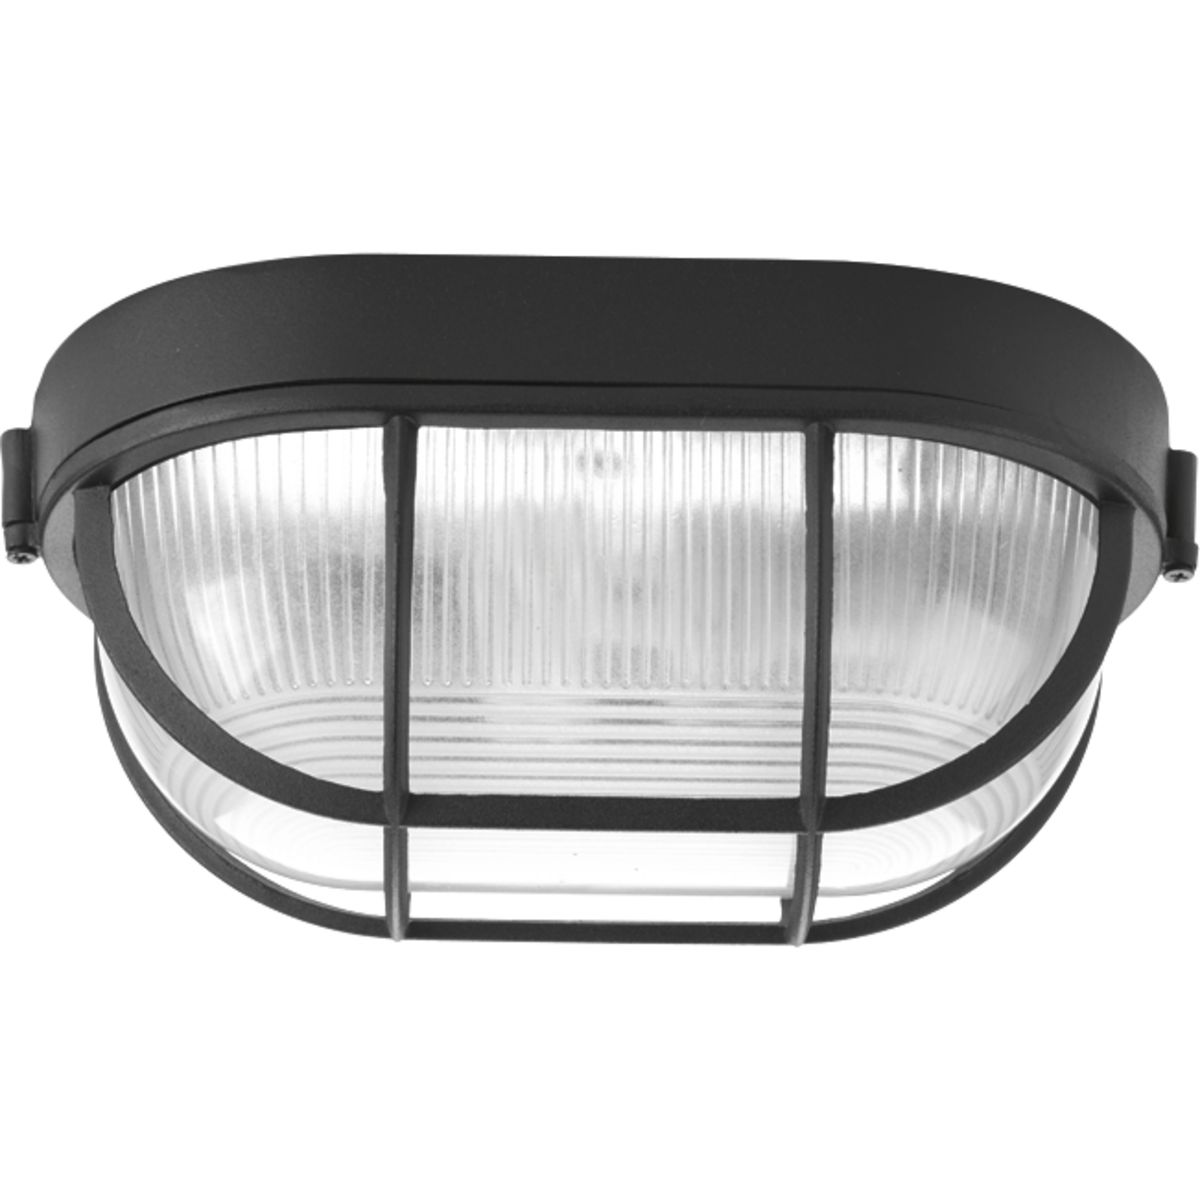 One-Light Bulkhead 6-3/8 in Flush Mount. Robust bulkheads are a general-purpose luminaire. Comprised of a die-cast aluminum frame and polycarbonate diffuser. Fixtures are impact resistant and offer various mounting options and can be widely adopted for indoor and outdoor applications. Black finish.